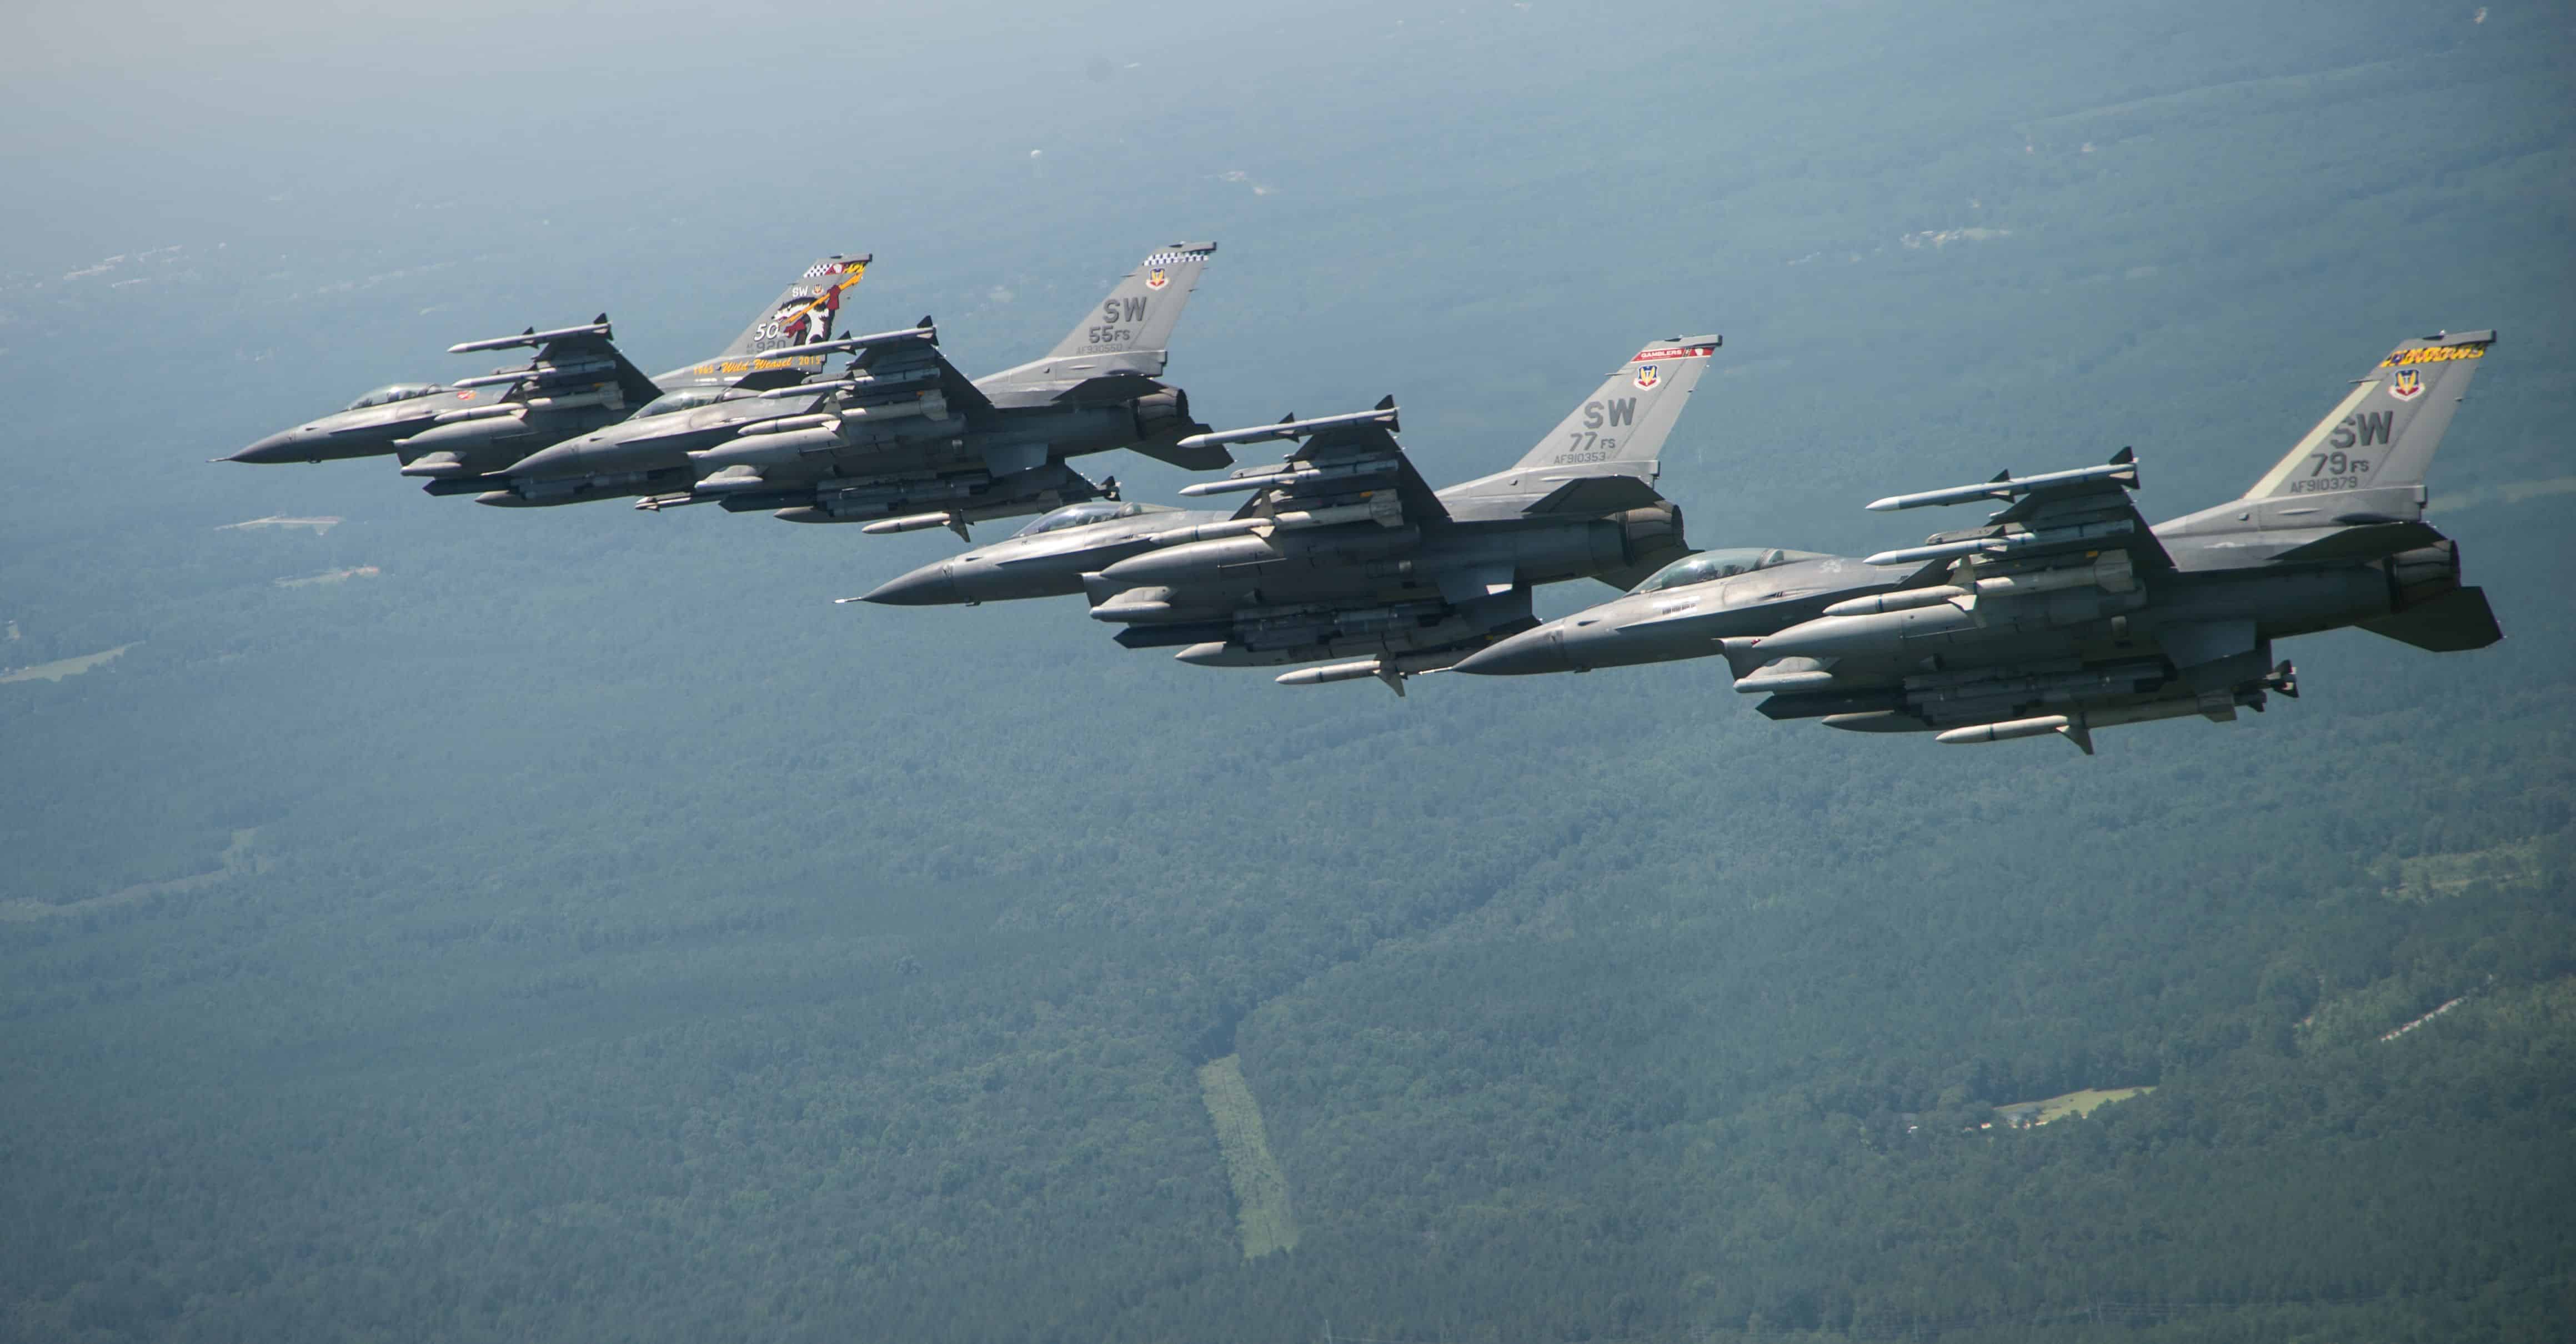 A Four-Ship formation of F-16 Fighting Falcons fly over Shaw Air Force Base, S.C., 21 July, 2017, as part of a commemoration of the hundredth anniversary of the 55th Fighter Squadrons activation. The formation consisted of the wing flagship aircraft from the 55th, 77th, and 79th fighter squadrons all stationed at Shaw AFB. (U.S. Air Force Photo by Tech. Sgt. Gregory Brook)